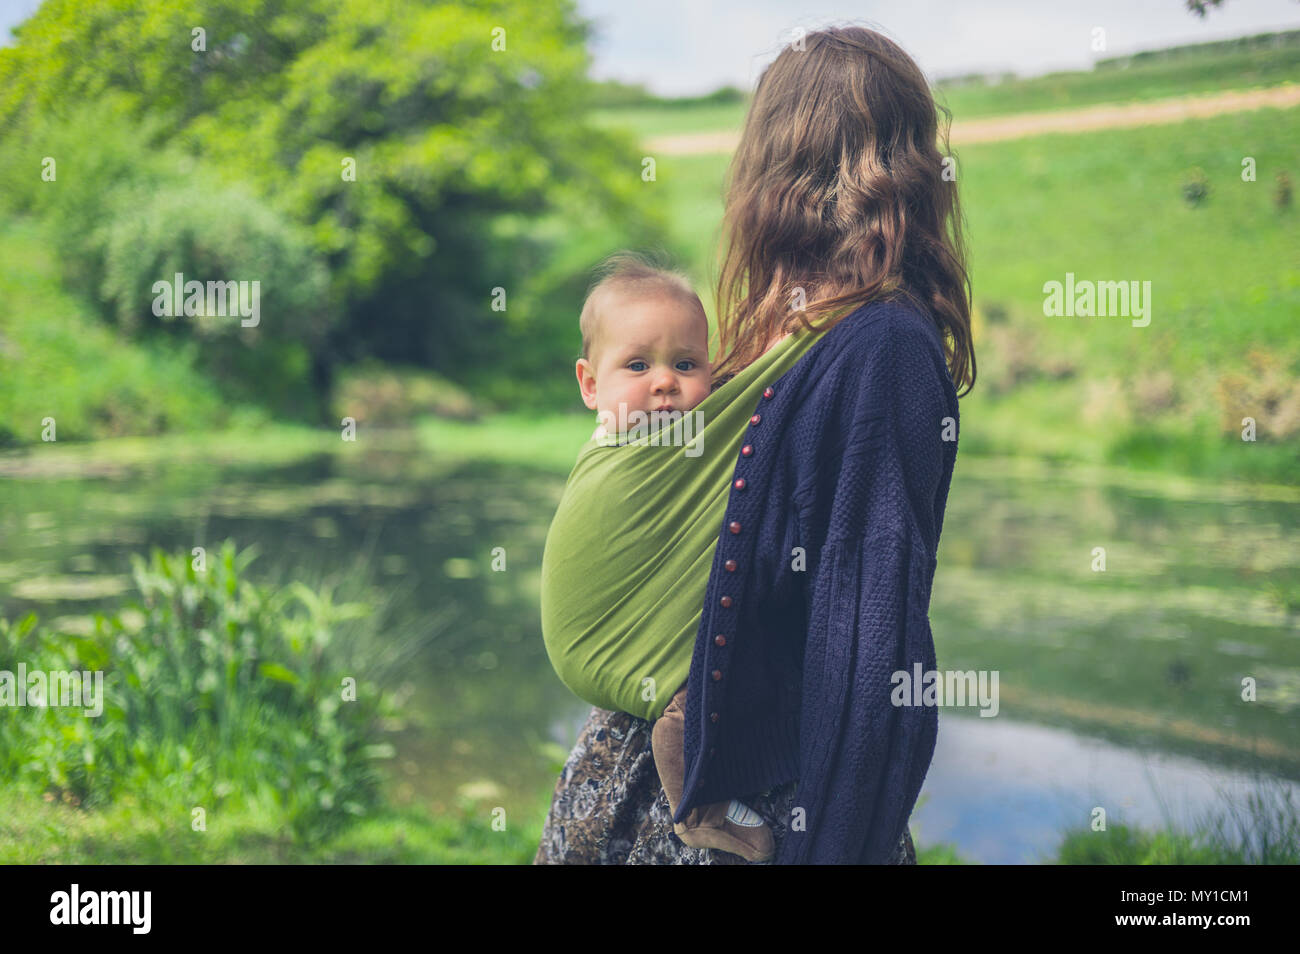 A young woman with a baby in a sling is standing by a pond in the countryside Stock Photo